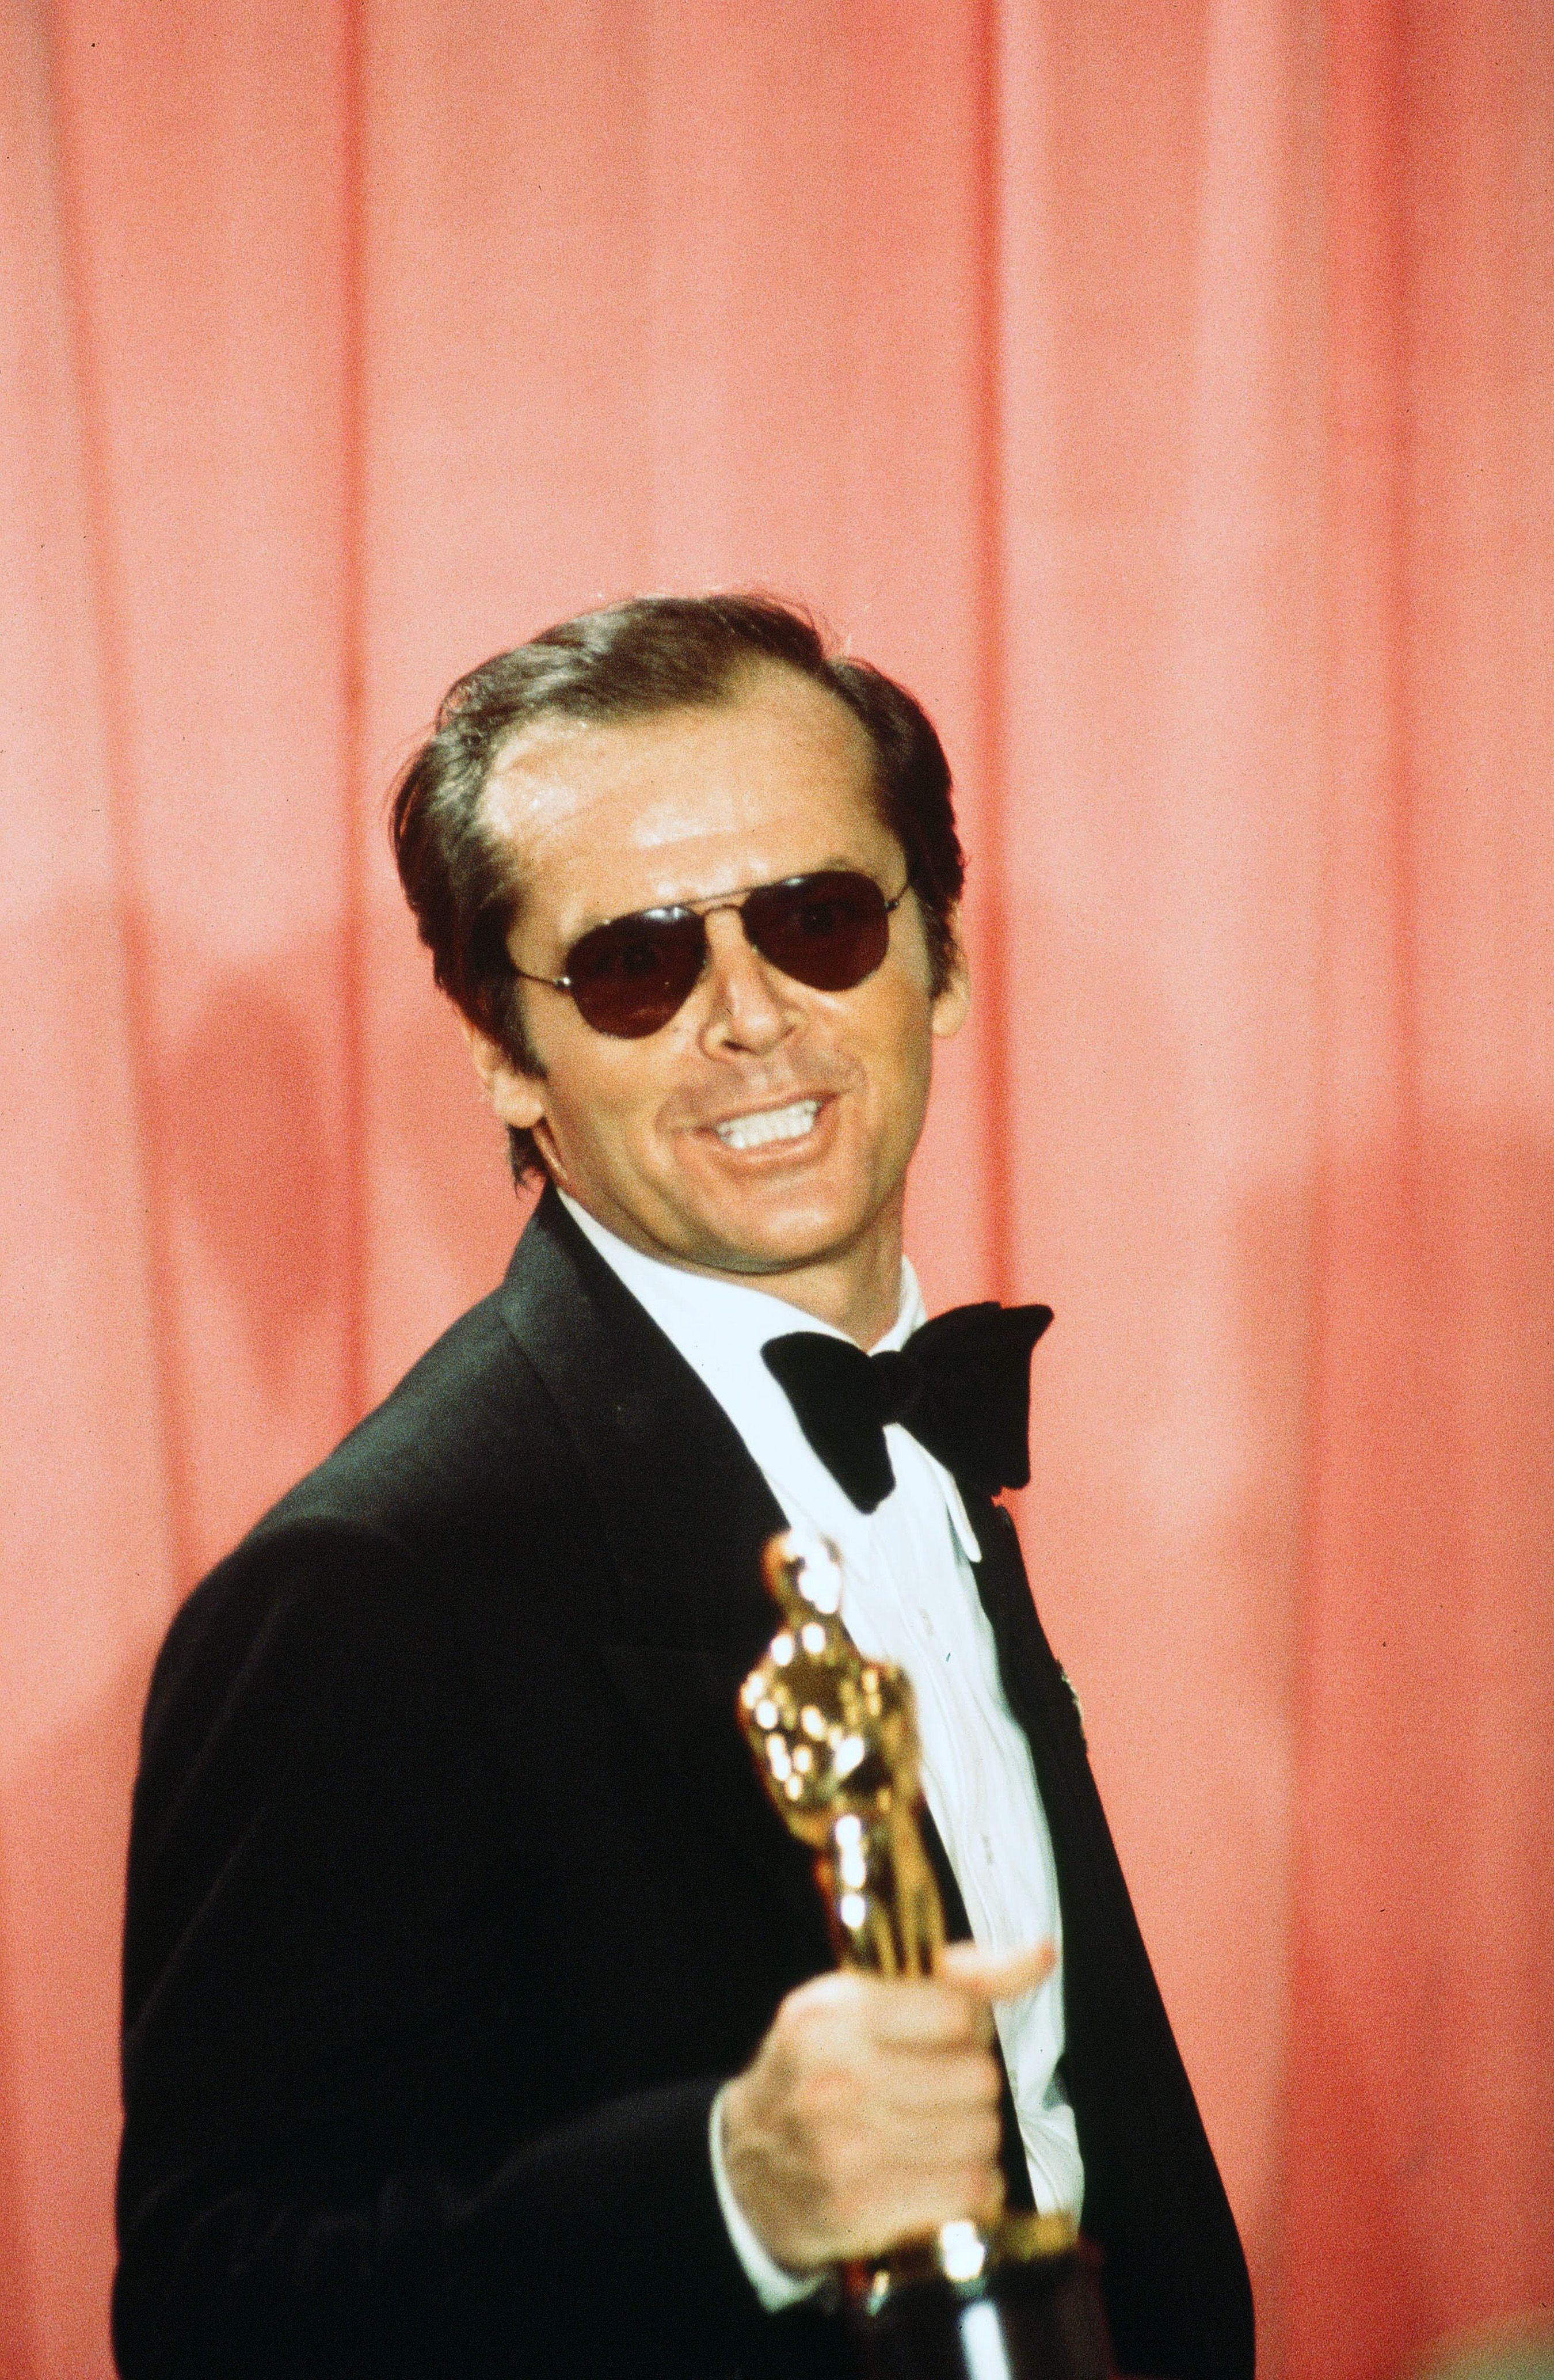 Jack Nicholson S Life In Photos Pictures Of Jack Nicholson